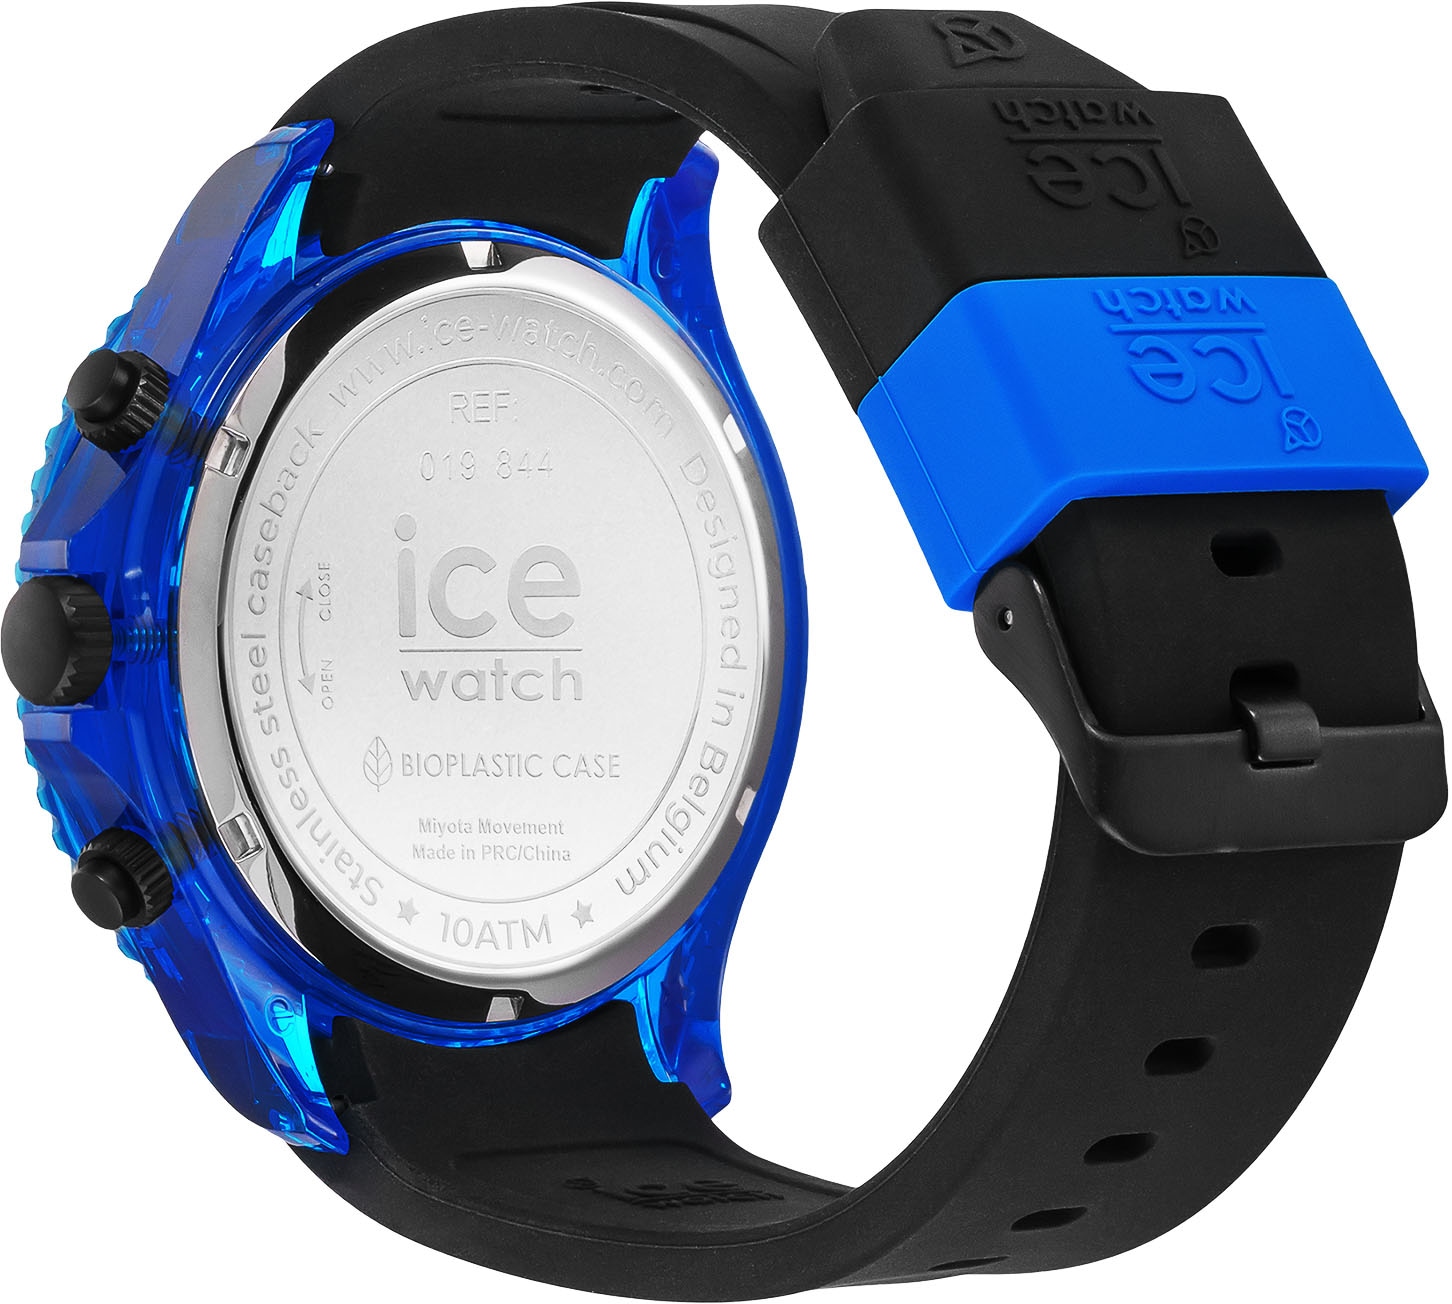 ice-watch Chronograph »ICE chrono 019844« blue shoppen OTTO large - CH, - - Extra Black bei online